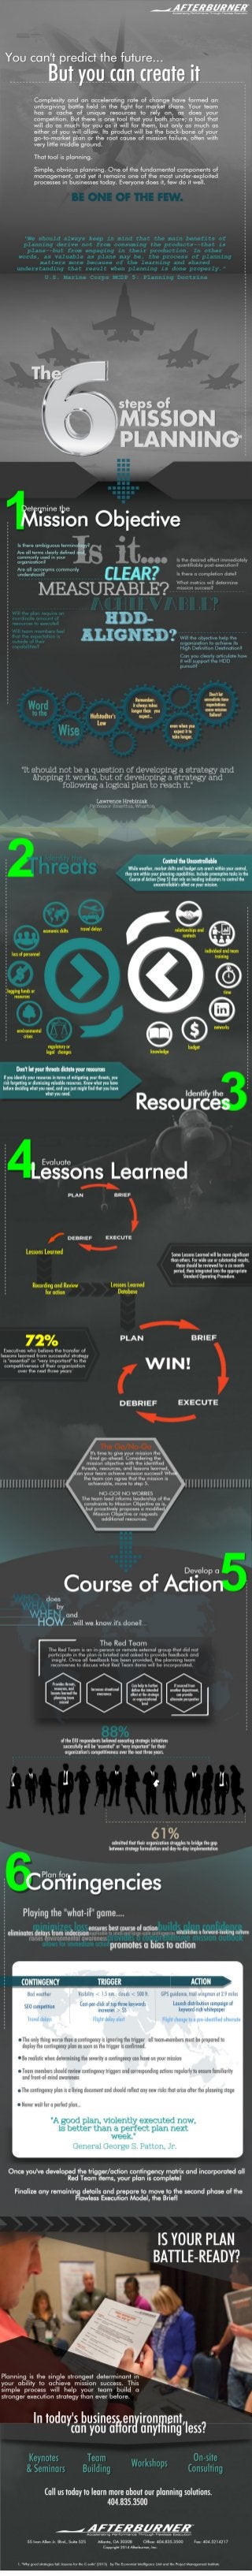 Infographic | The 6 Steps of Mission Planning